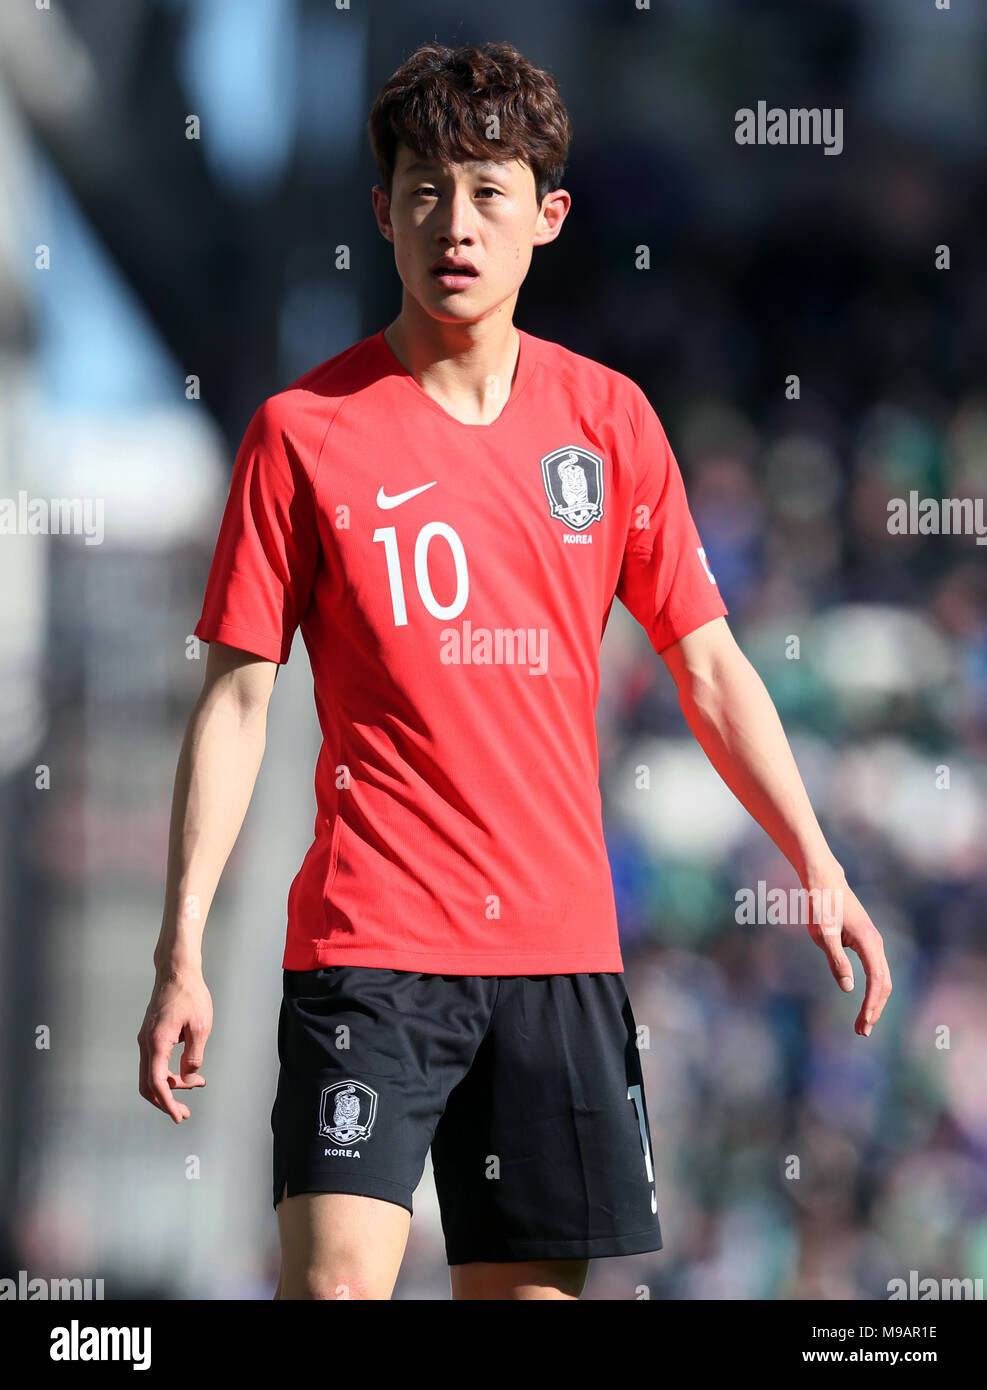 South Korea's Jae-Sung Lee during the international friendly match at Windsor Park, Belfast. PRESS ASSOCIATION Photo. Picture date: Saturday March 24, 2018. See PA story SOCCER N Ireland. Photo credit should read: Brian Lawless/PA Wire. RESTRICTIONS: Editorial use only, No commercial use without prior permission. Stock Photo